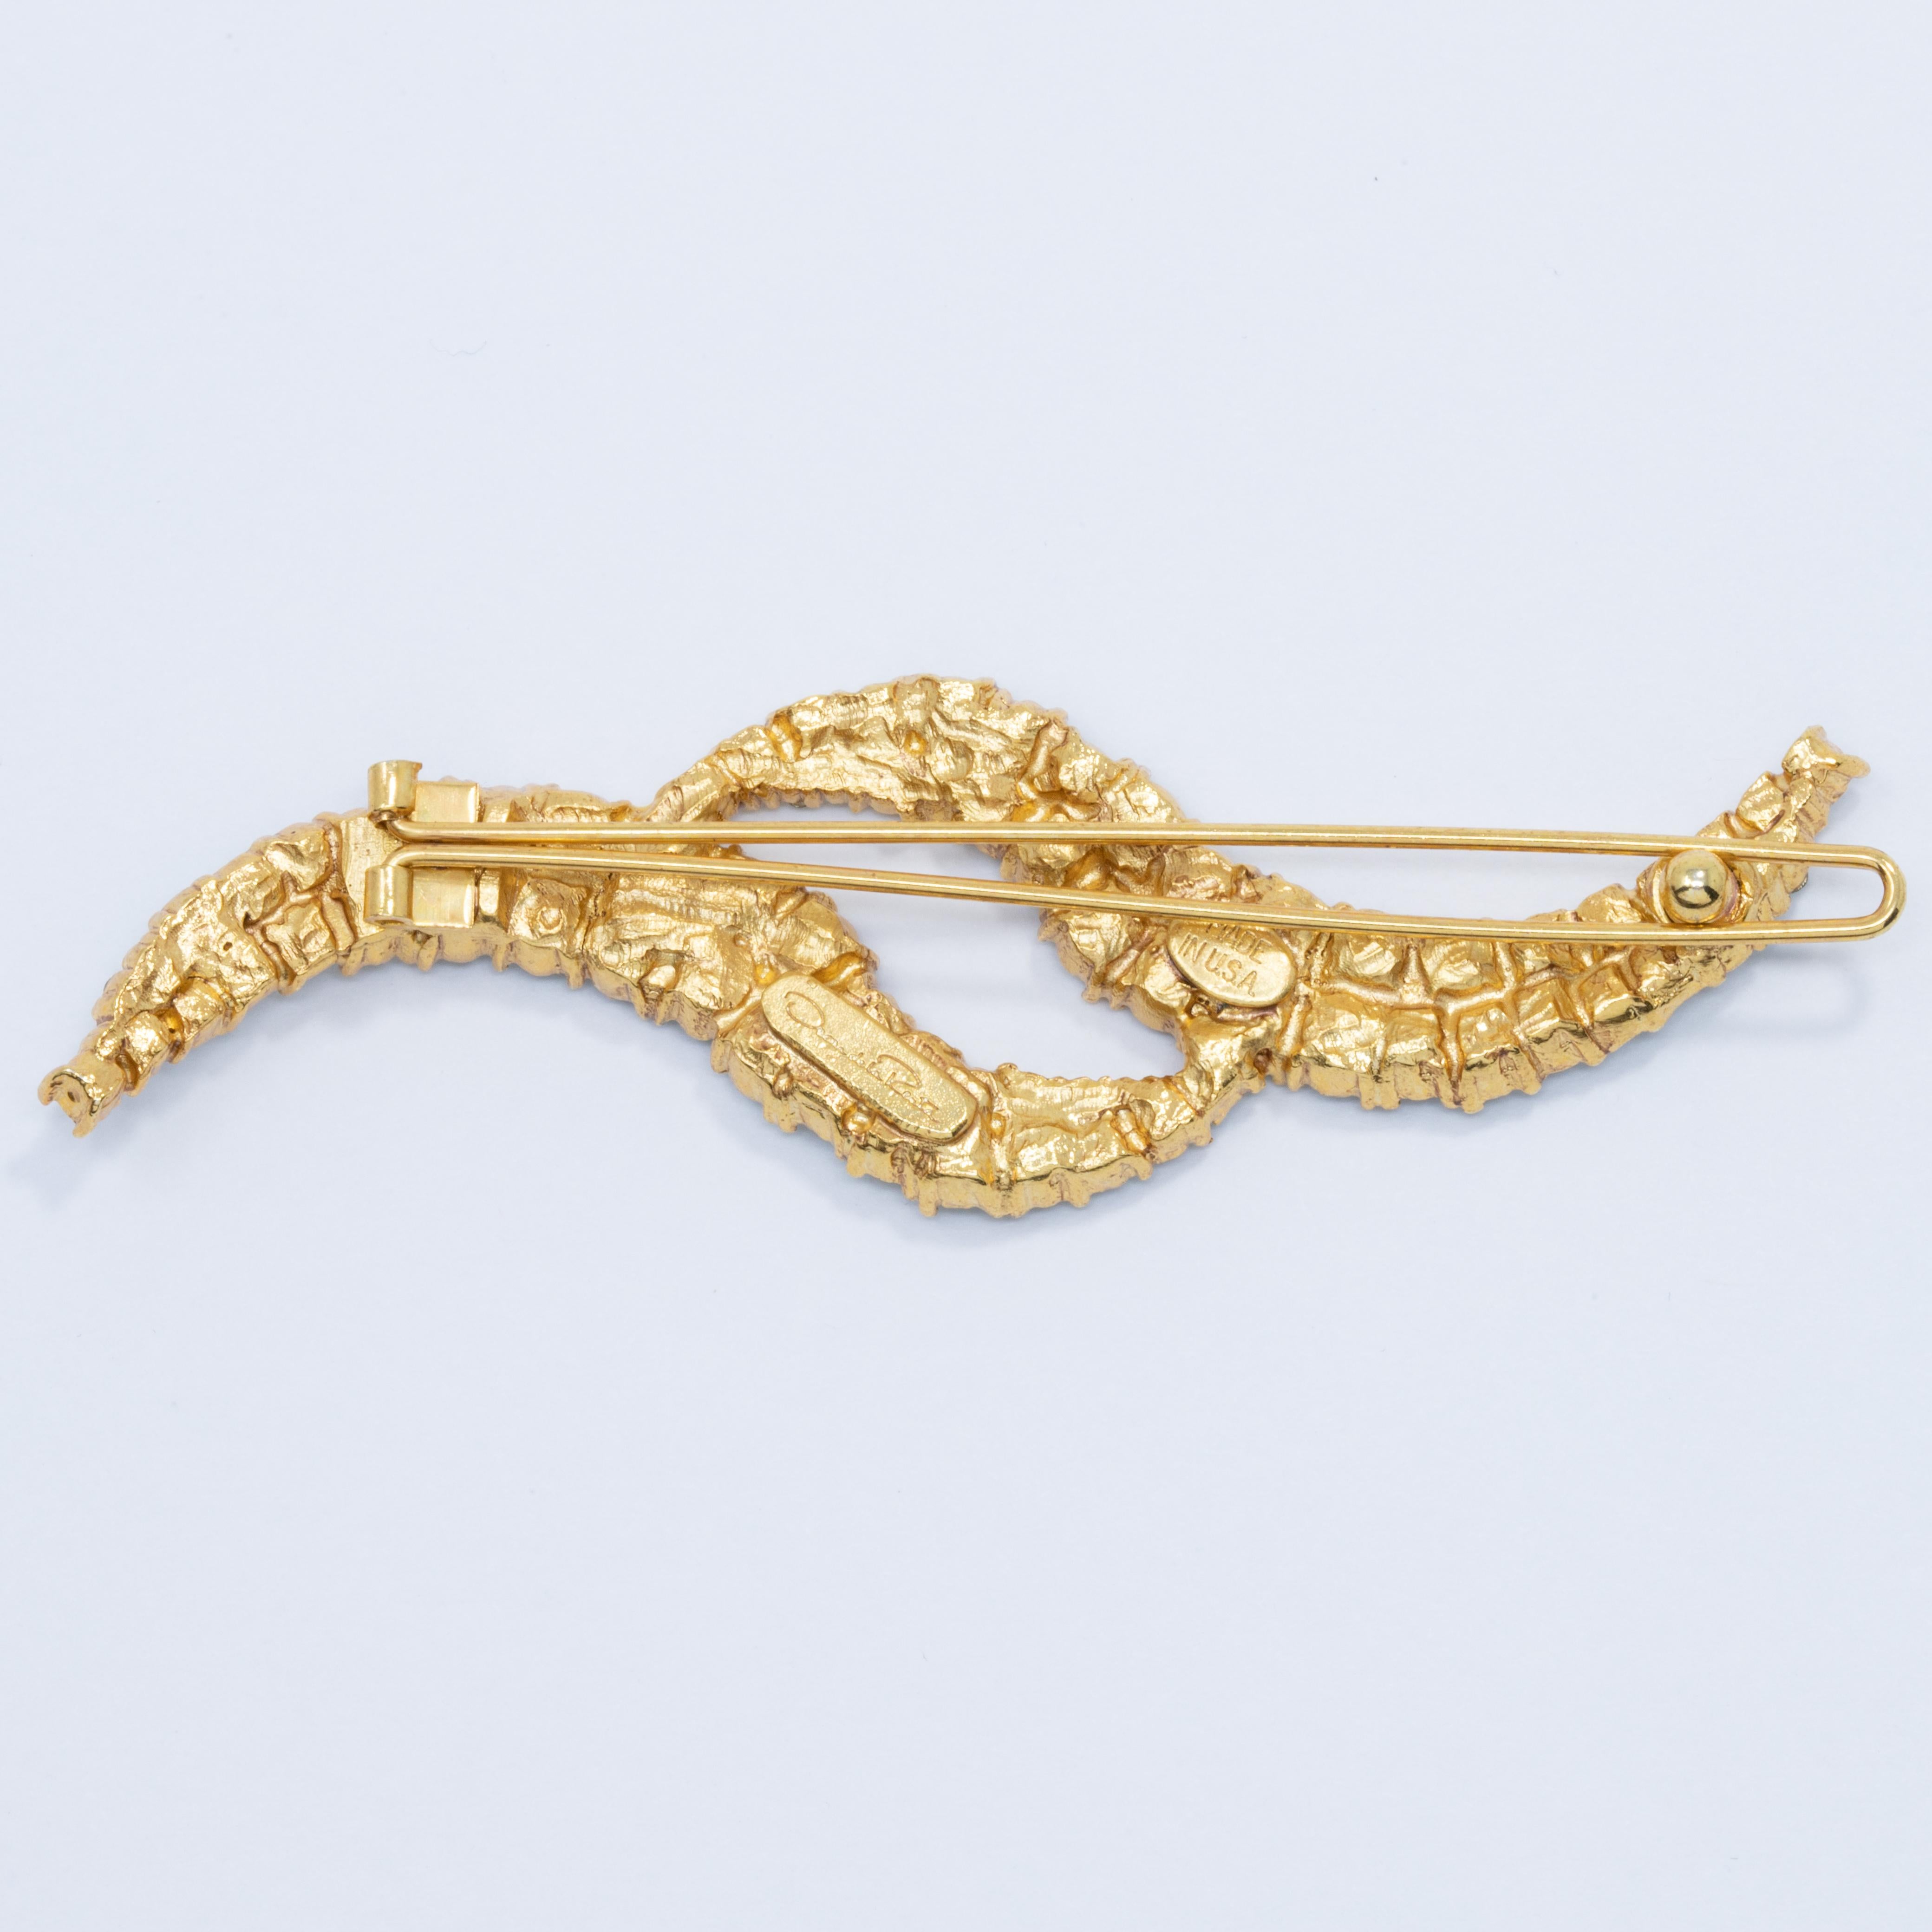 Add some sparkling charm to your wardrobe with this Oscar de la Renta hair clip / brooch. Two flowing, golden wave motifs, decorated with gleaming, aquamarine Swarovski crystals. Sure to catch the eye!

Marks / hallmarks: Oscar de la Renta, Made in